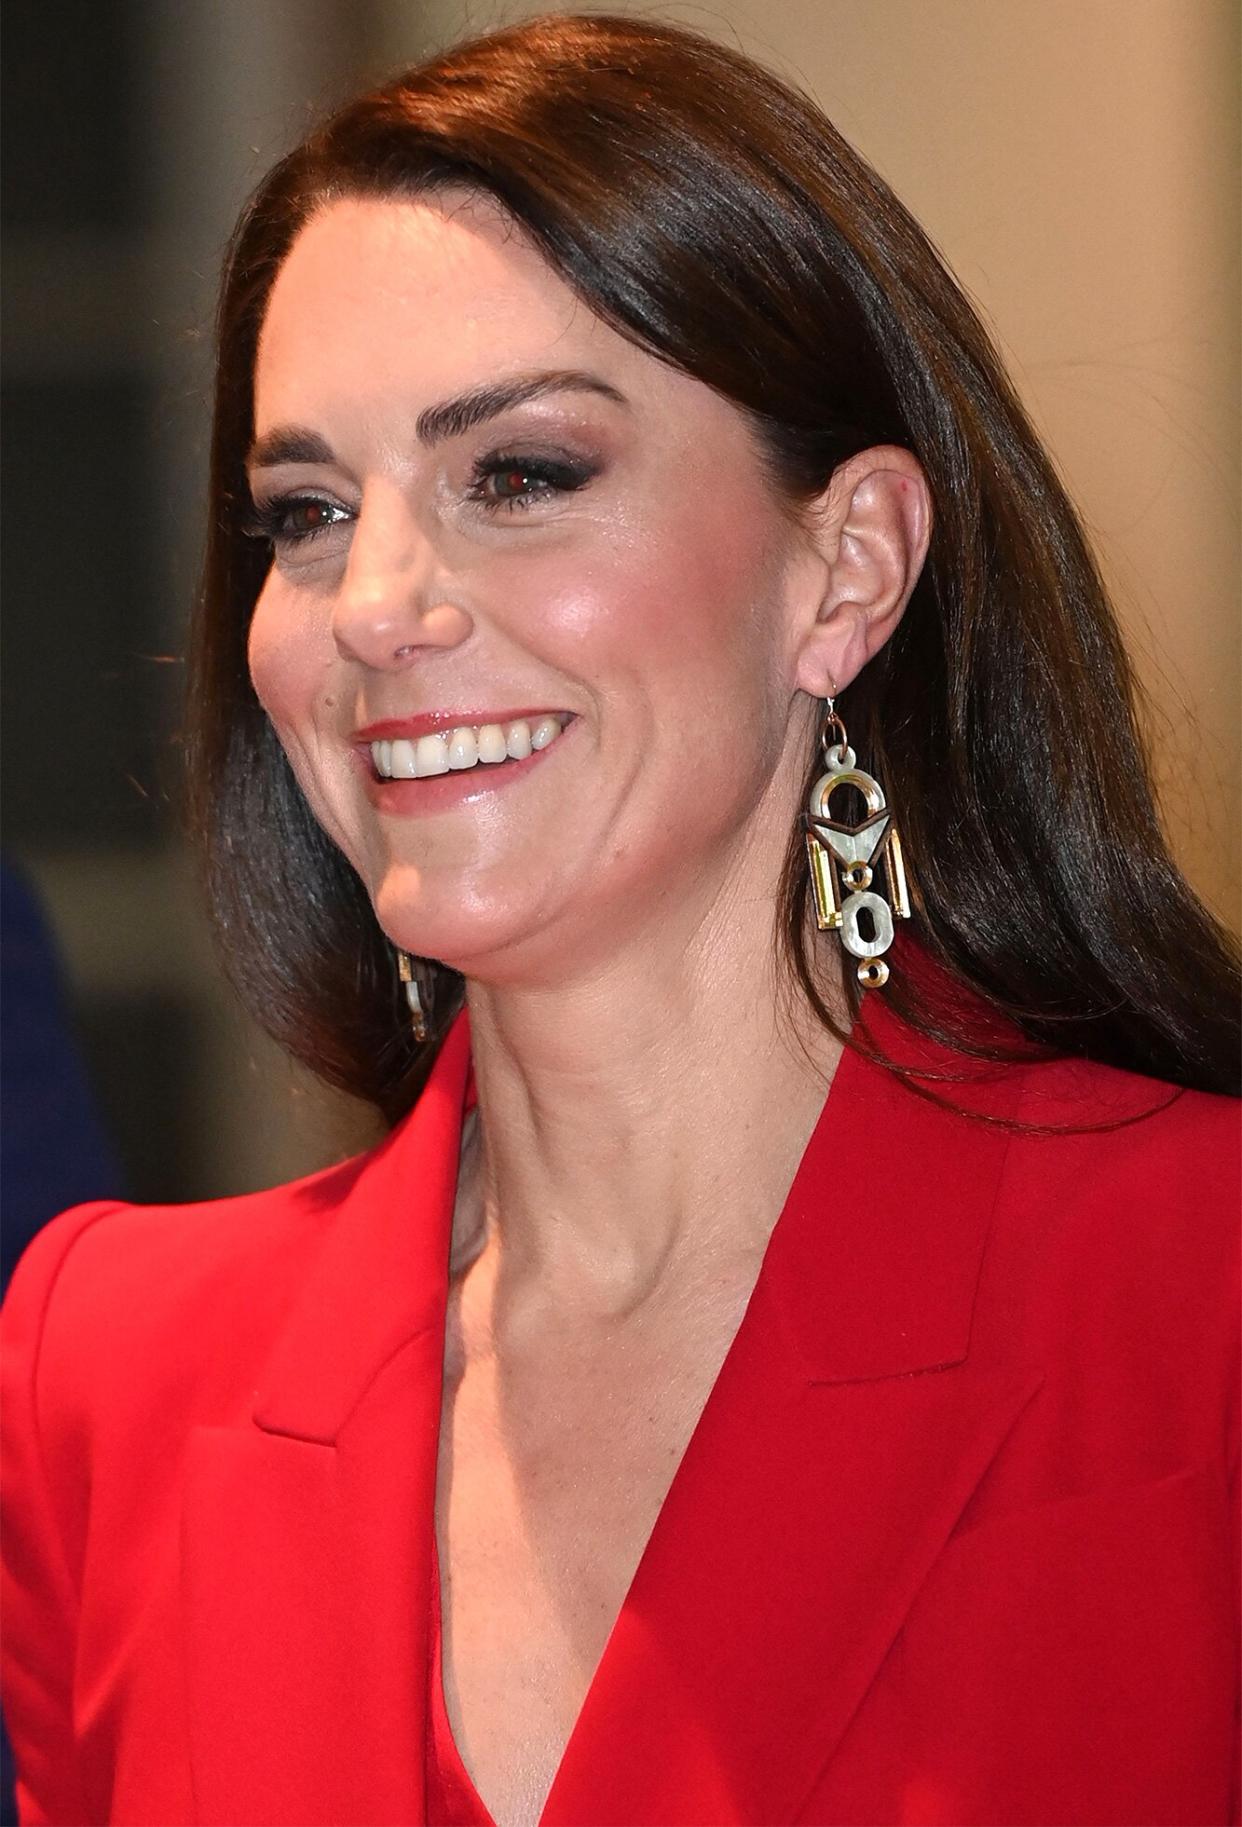 Britain's Catherine, Princess of Wales attends a pre-campaign launch event, hosted by The Royal Foundation Centre for Early Childhood, at BAFTA in central London on January 30, 2023